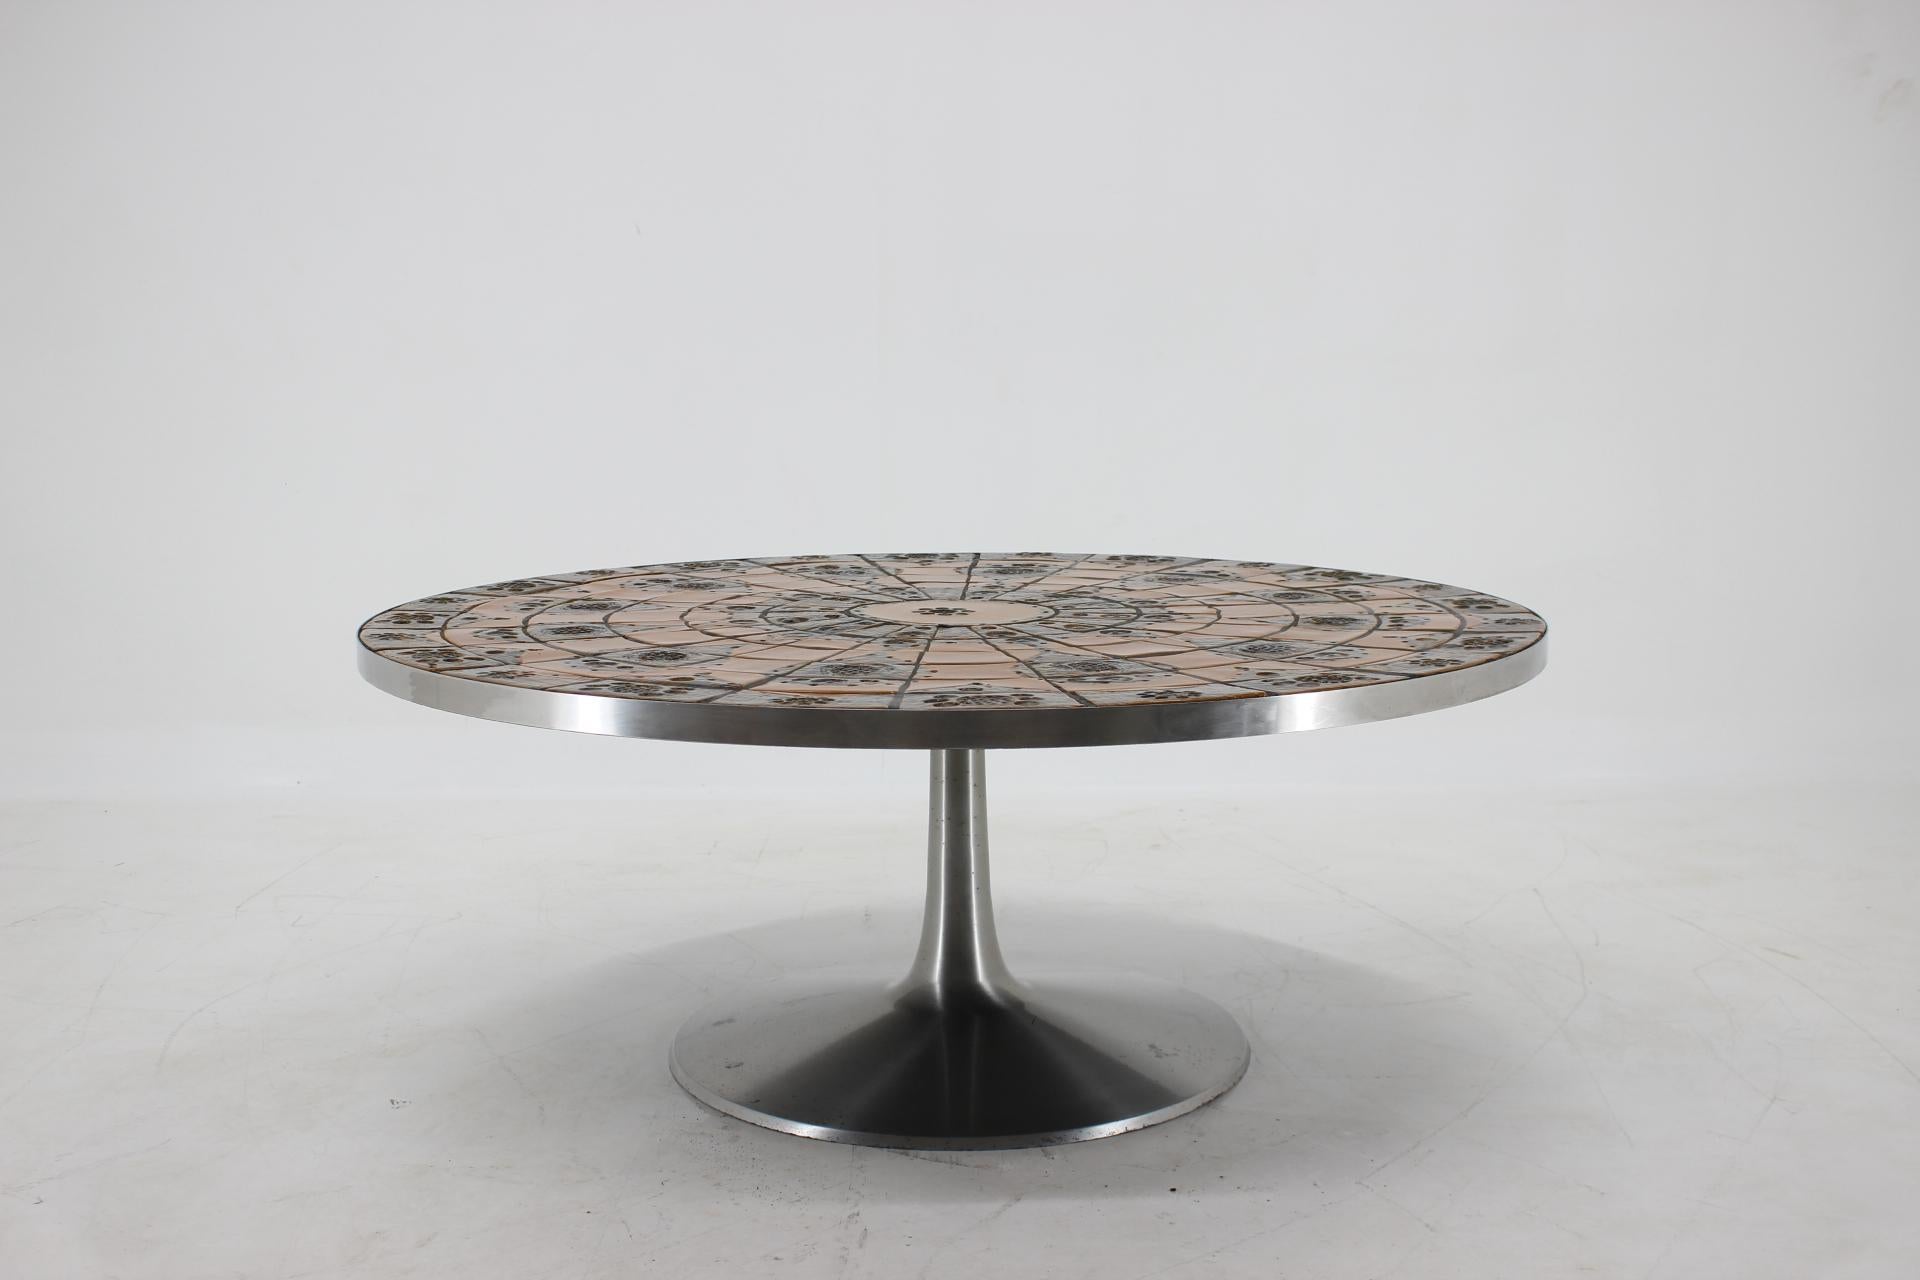 This striking Poul Cadovius coffee table has a stunning tile top by Lilly Just Lichtenberg in burnt orange and earth tones supported by an aluminum tulip style base. 
The wonderful abstract design will make it the centerpiece of any room.